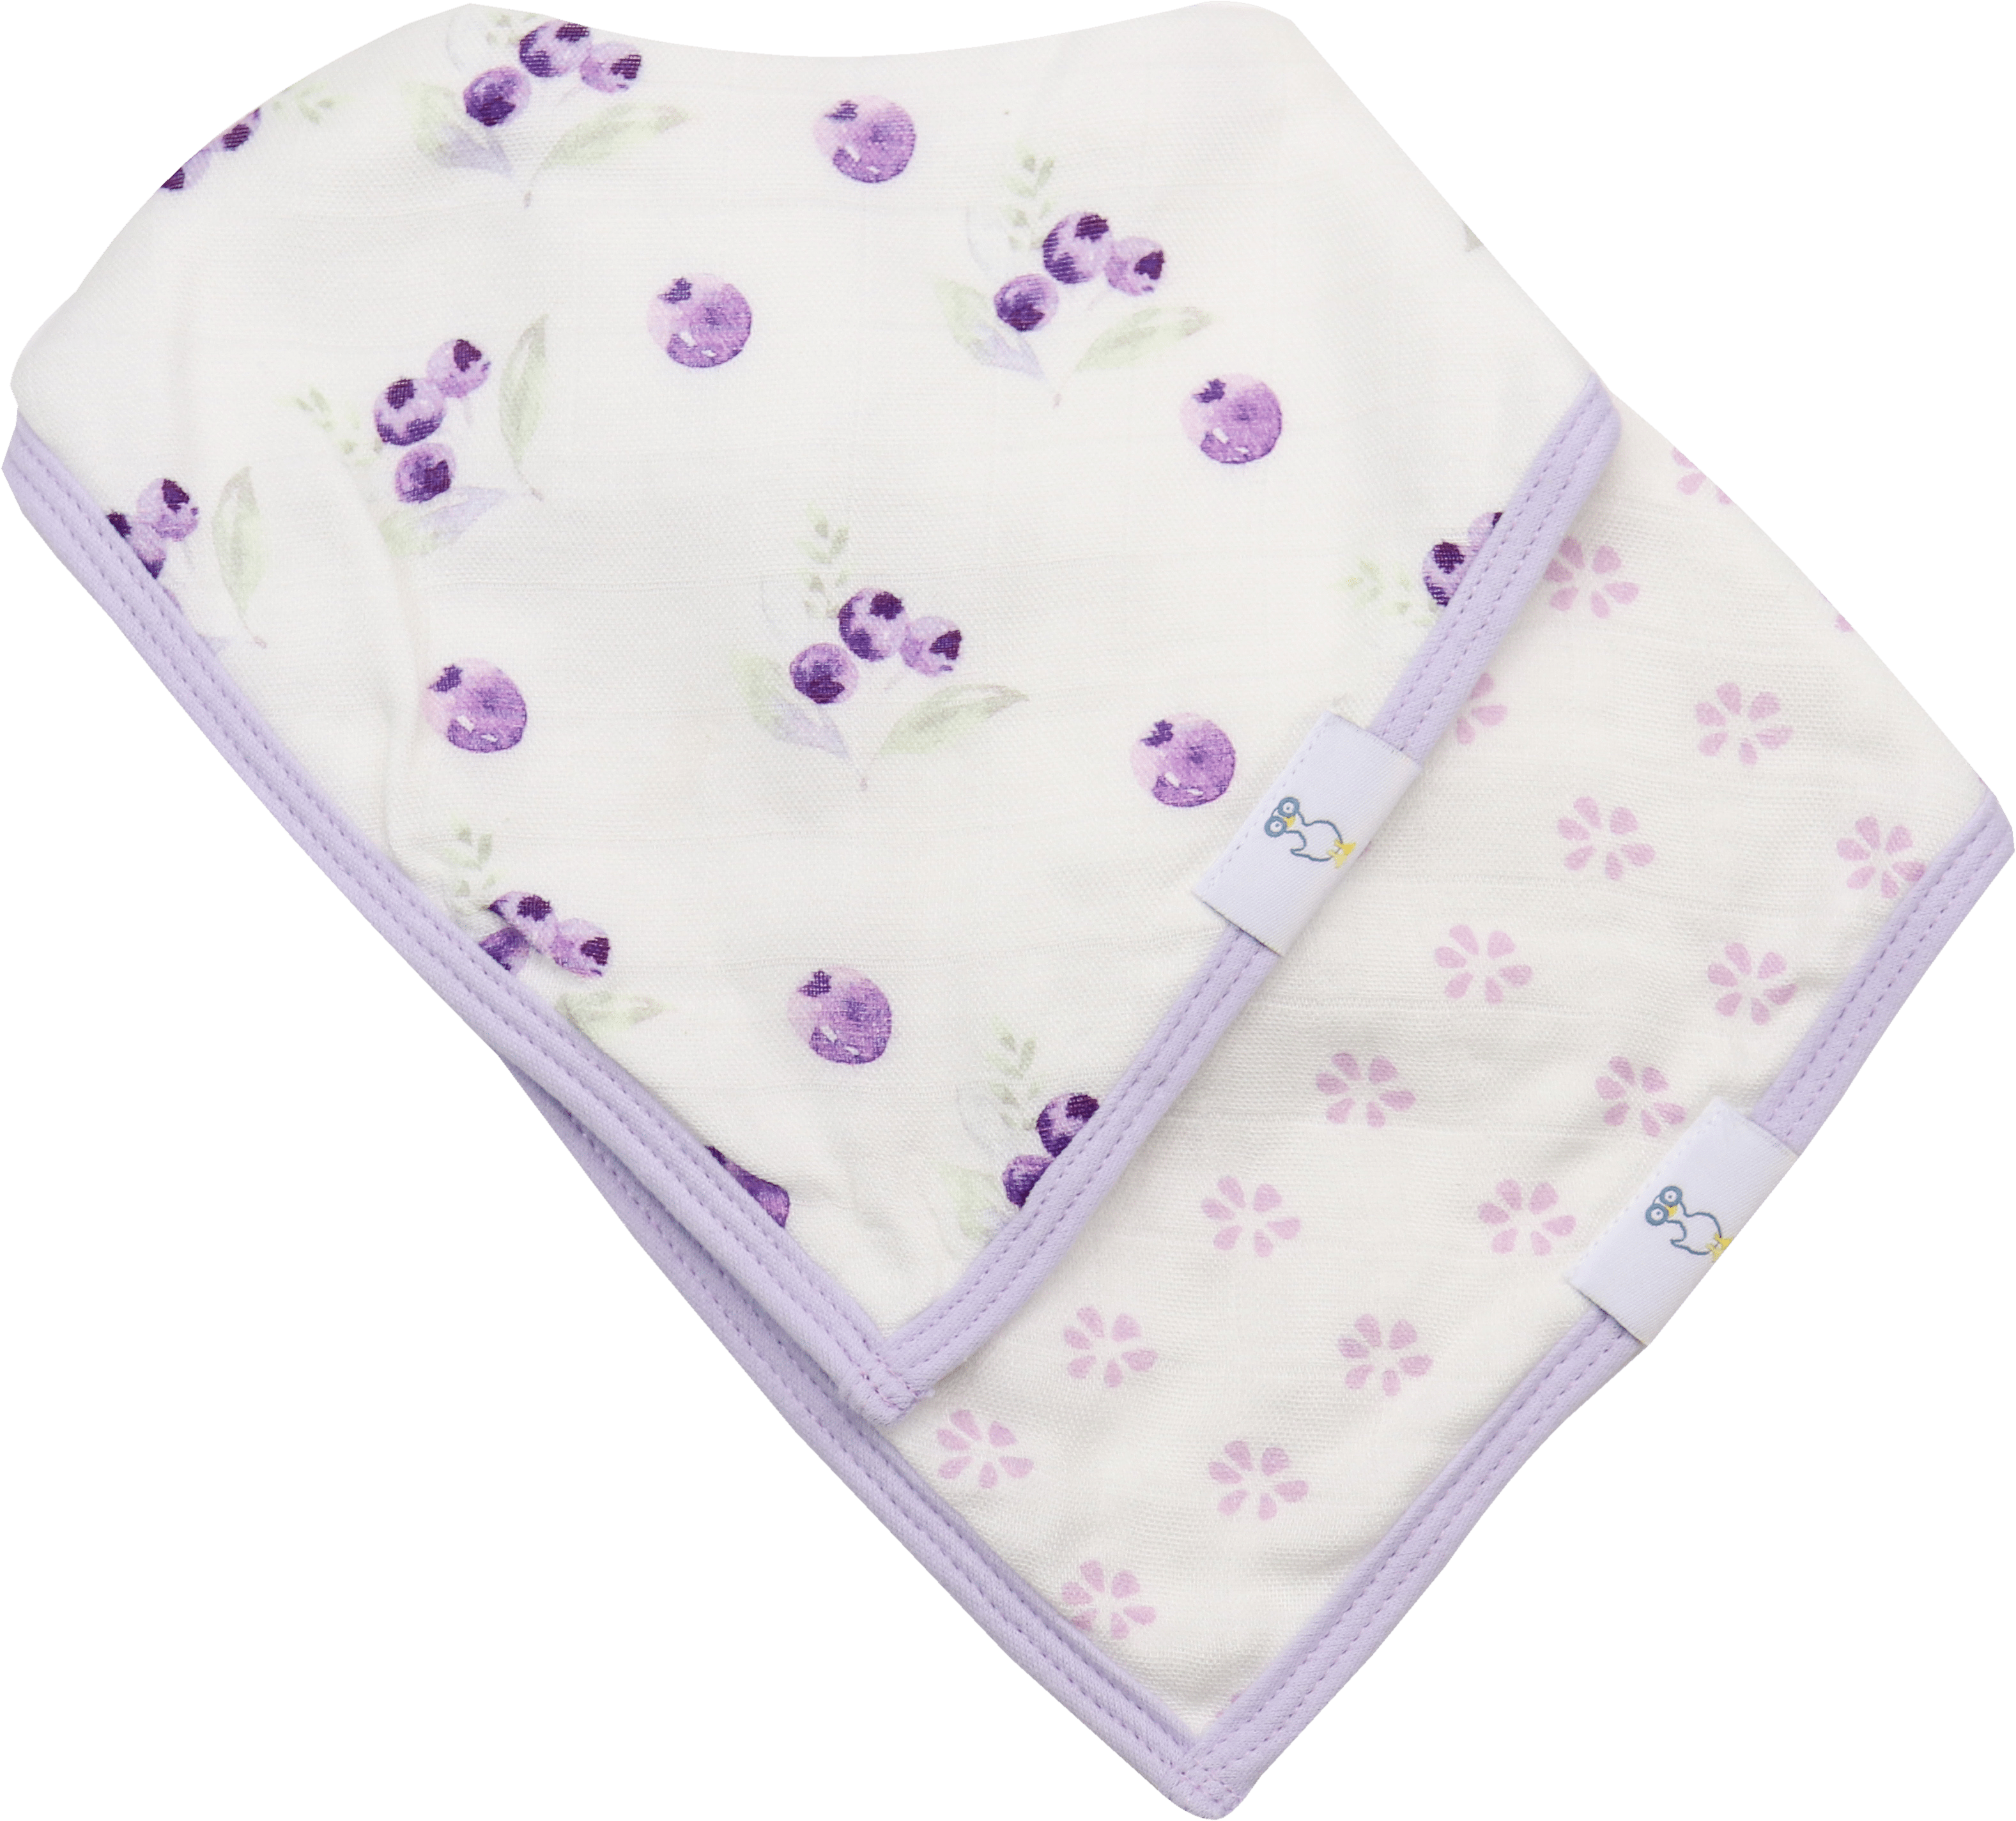 Lavender Attachable Wooden And Silicone Teether And Flower Bib Gift Set